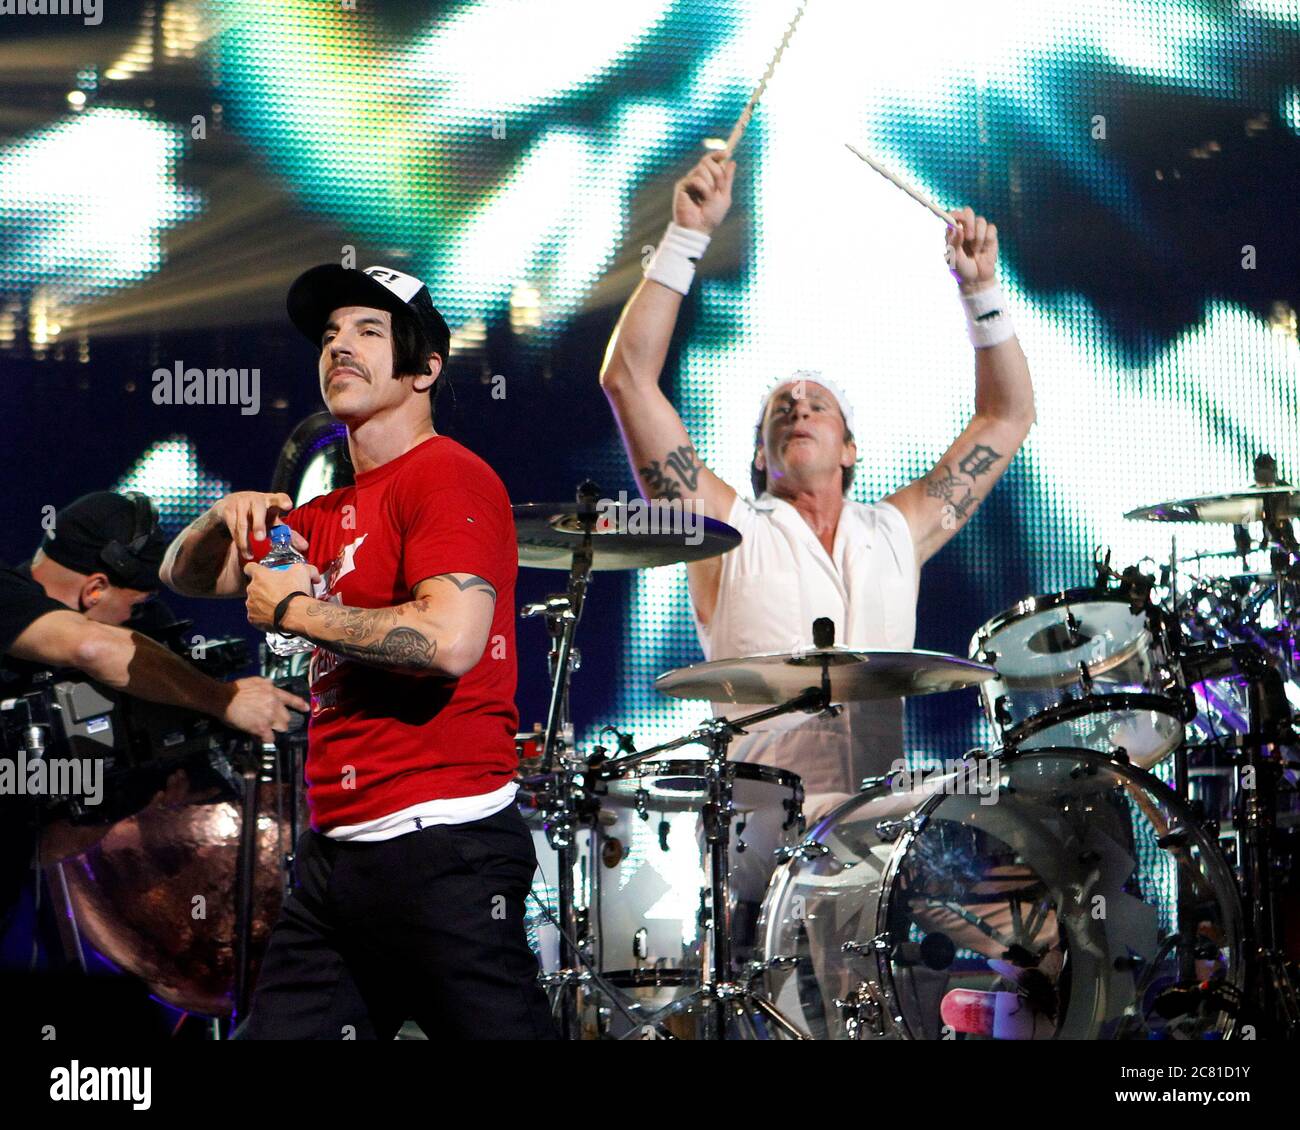 Red Hot Chili Pepper lead singer Anthony Kiedis performs with the rest of the band at the BankAtlantic Center near Fort Lauderdale, Florida. Stock Photo